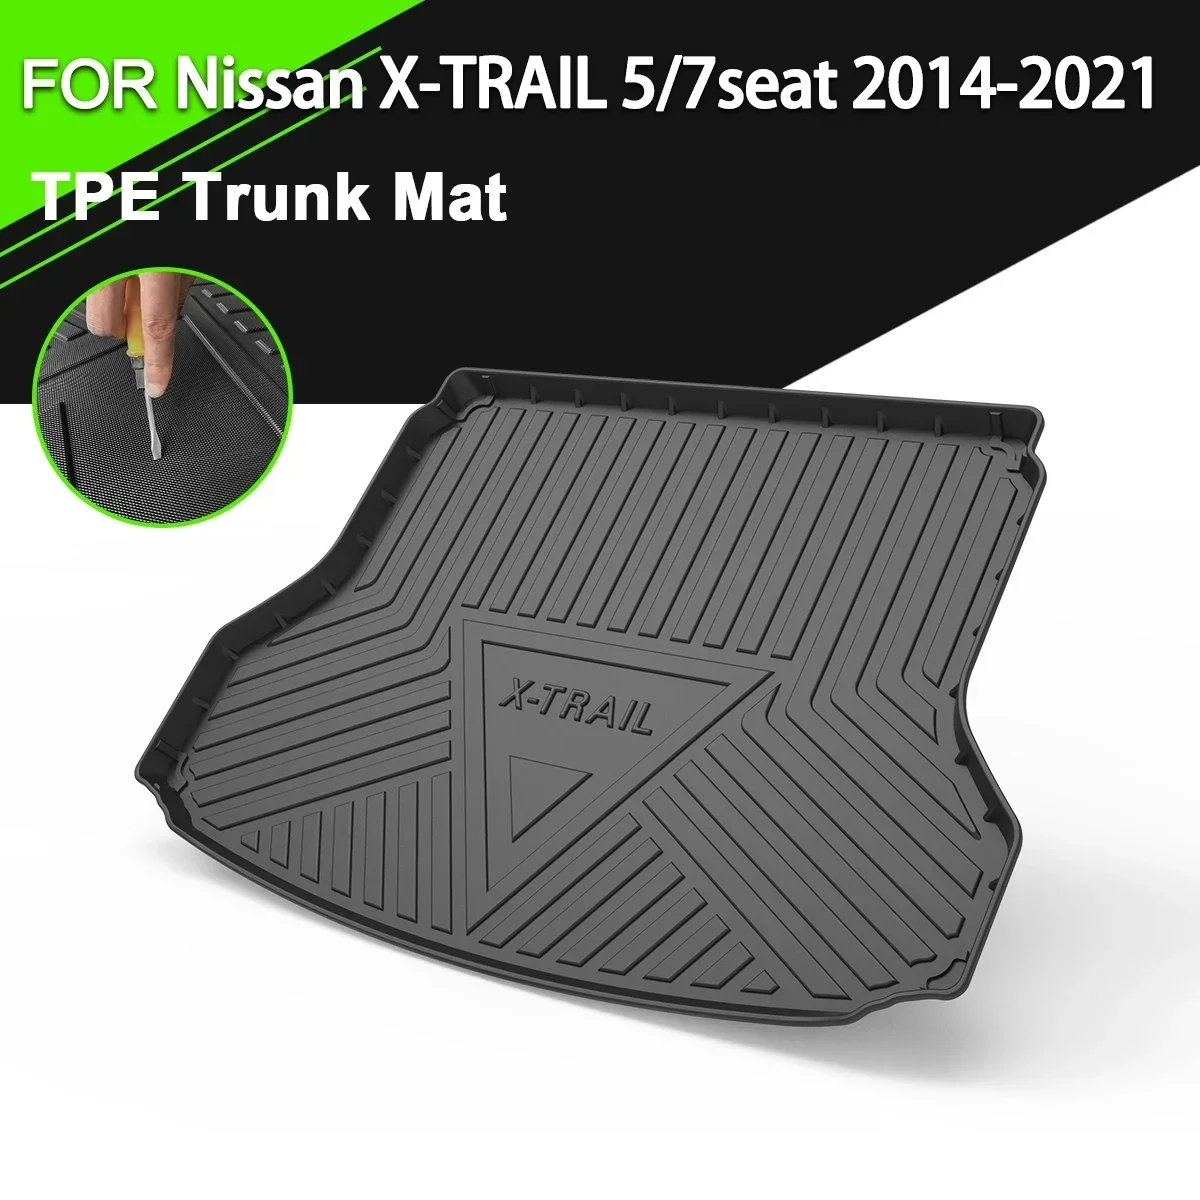 

Car Rear Trunk Cover Mat TPE Waterproof Non-Slip Rubber Cargo Liner Accessories For Nissan X-TRAIL 5/7 Seater 2014-2021